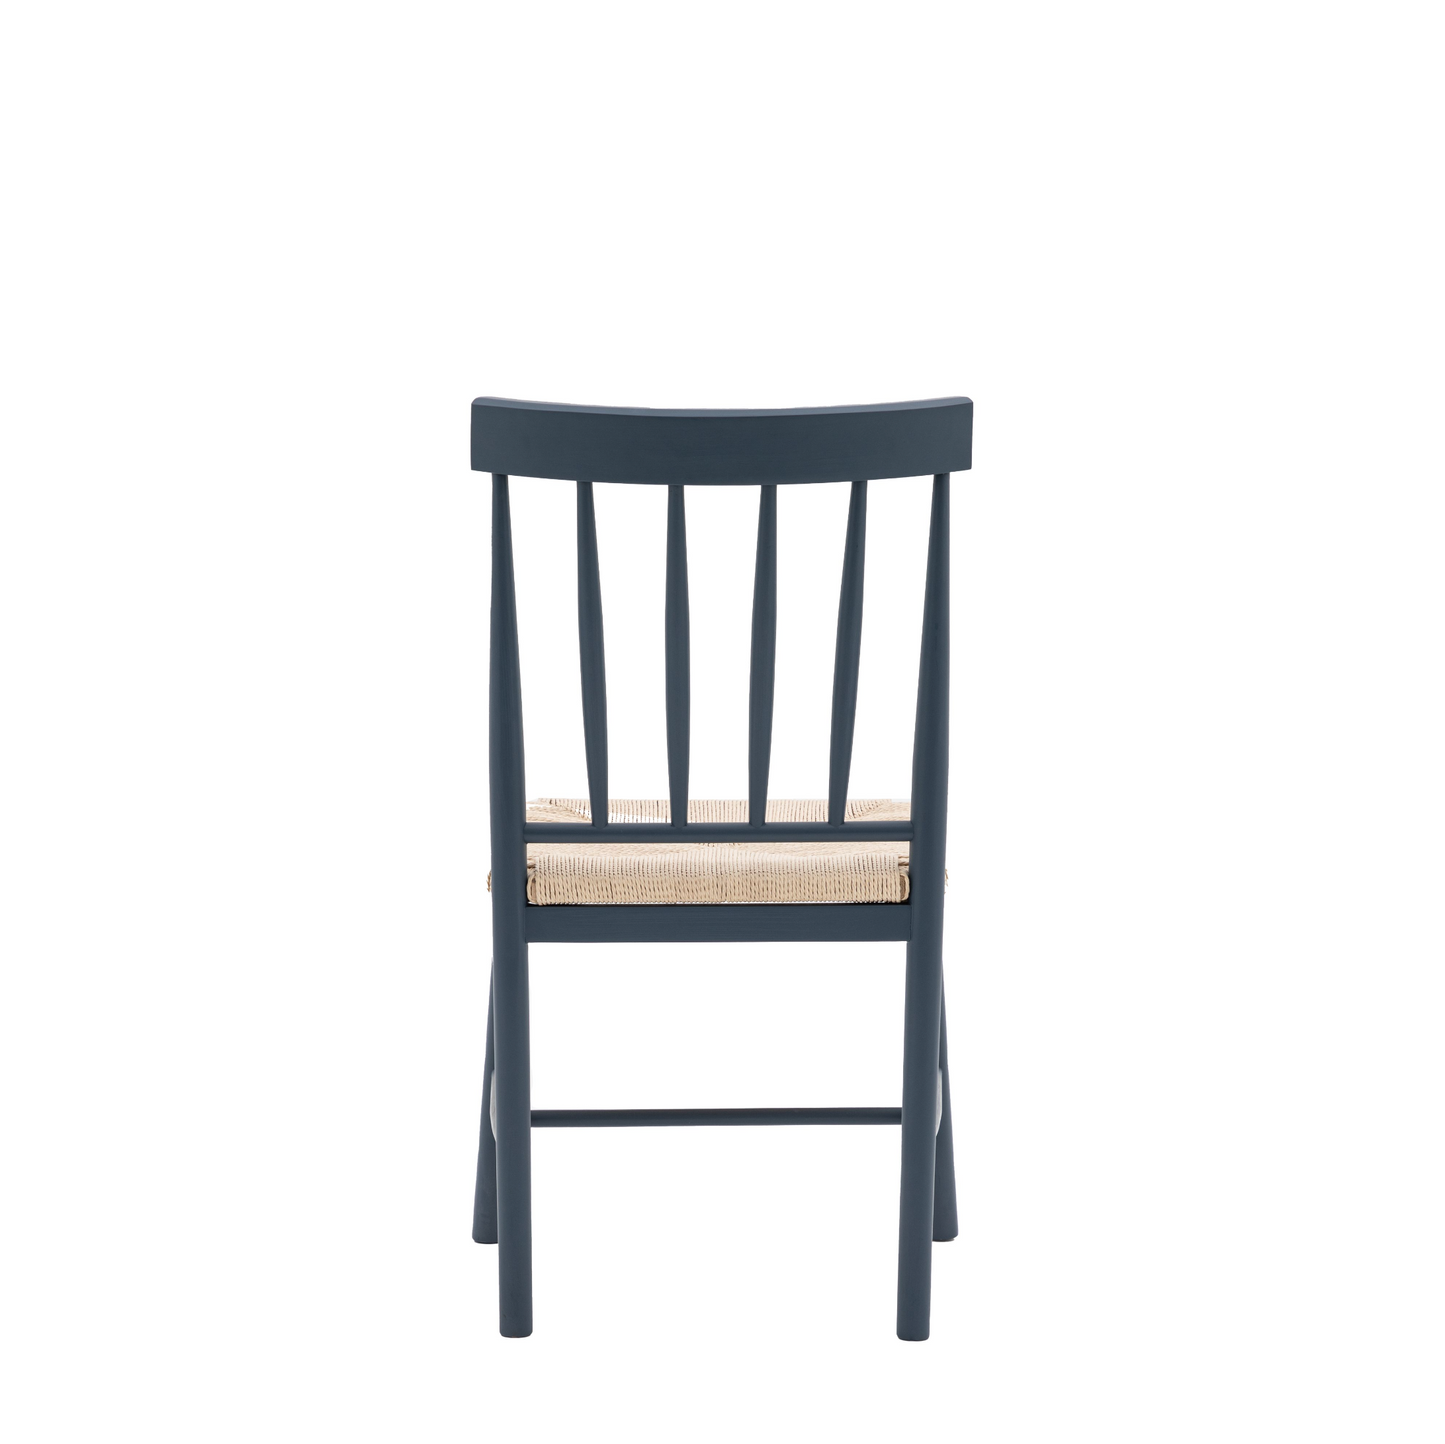 A Buckland Dining Chair 2pk in Meteor by Kikiathome.co.uk with a wooden seat for interior decor.